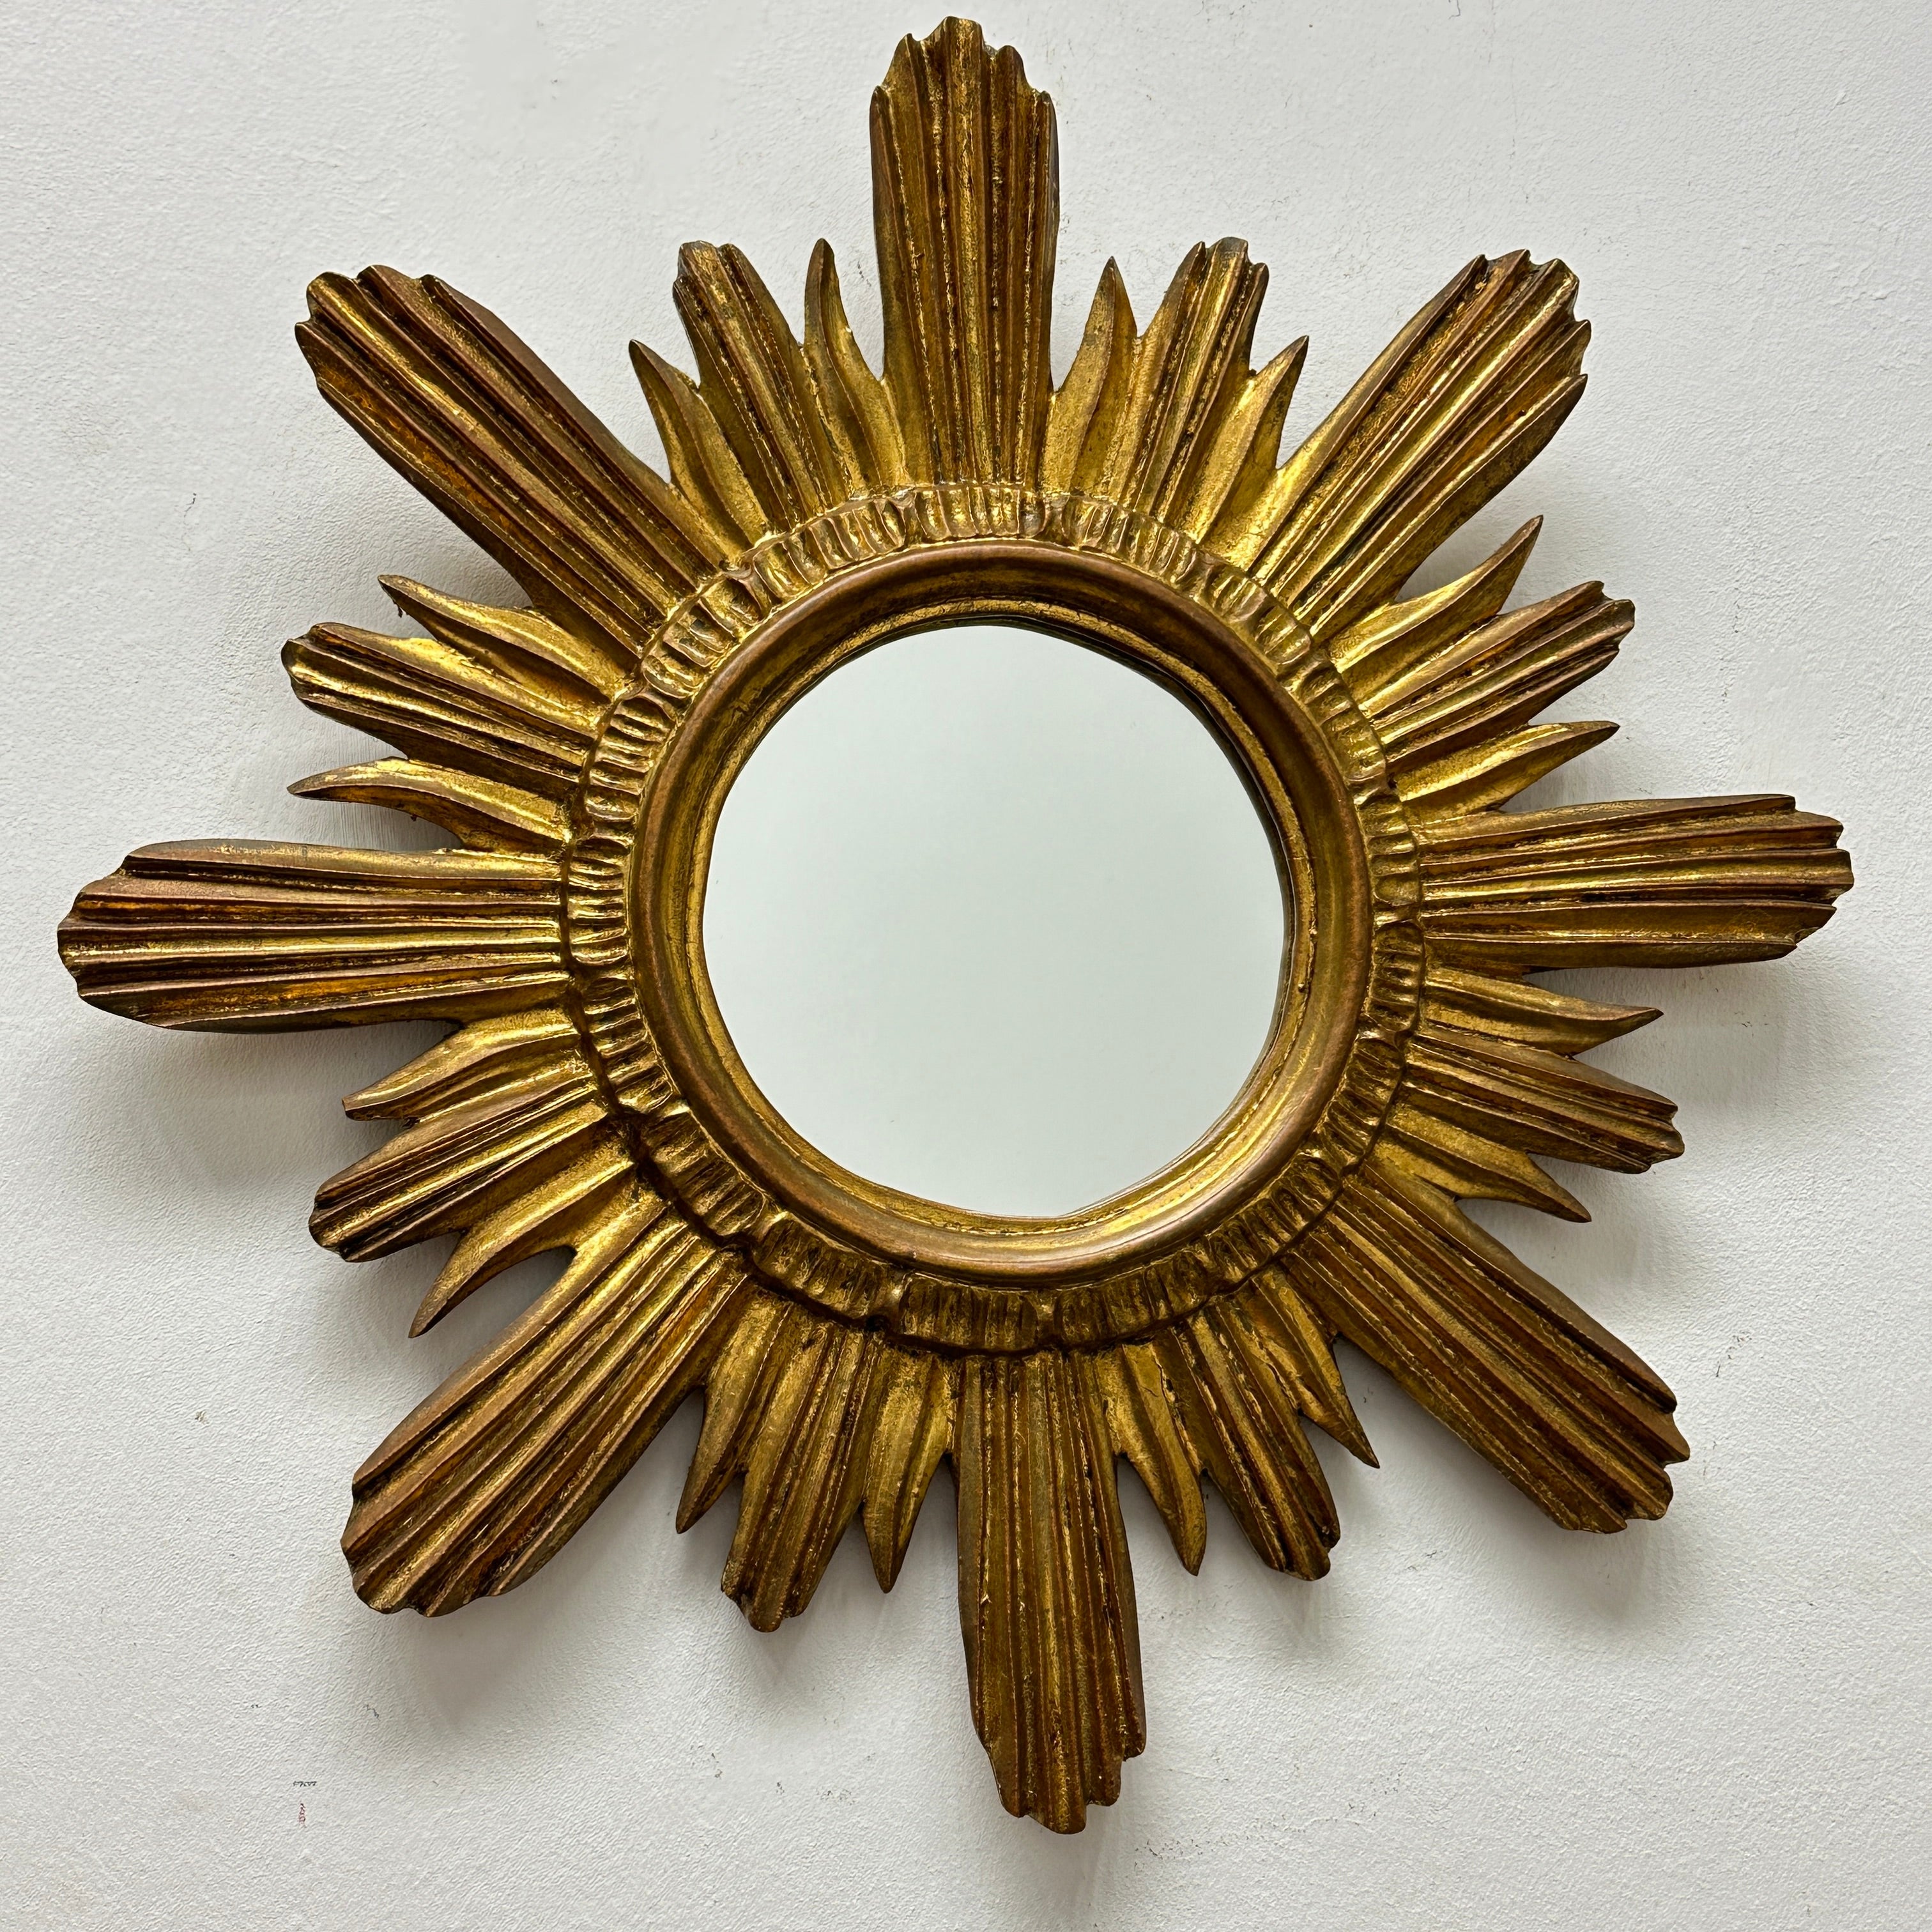 A gorgeous starburst mirror. Made of gilded wood and stucco. No chips, no cracks, no repairs. It measures approximate: 17.5